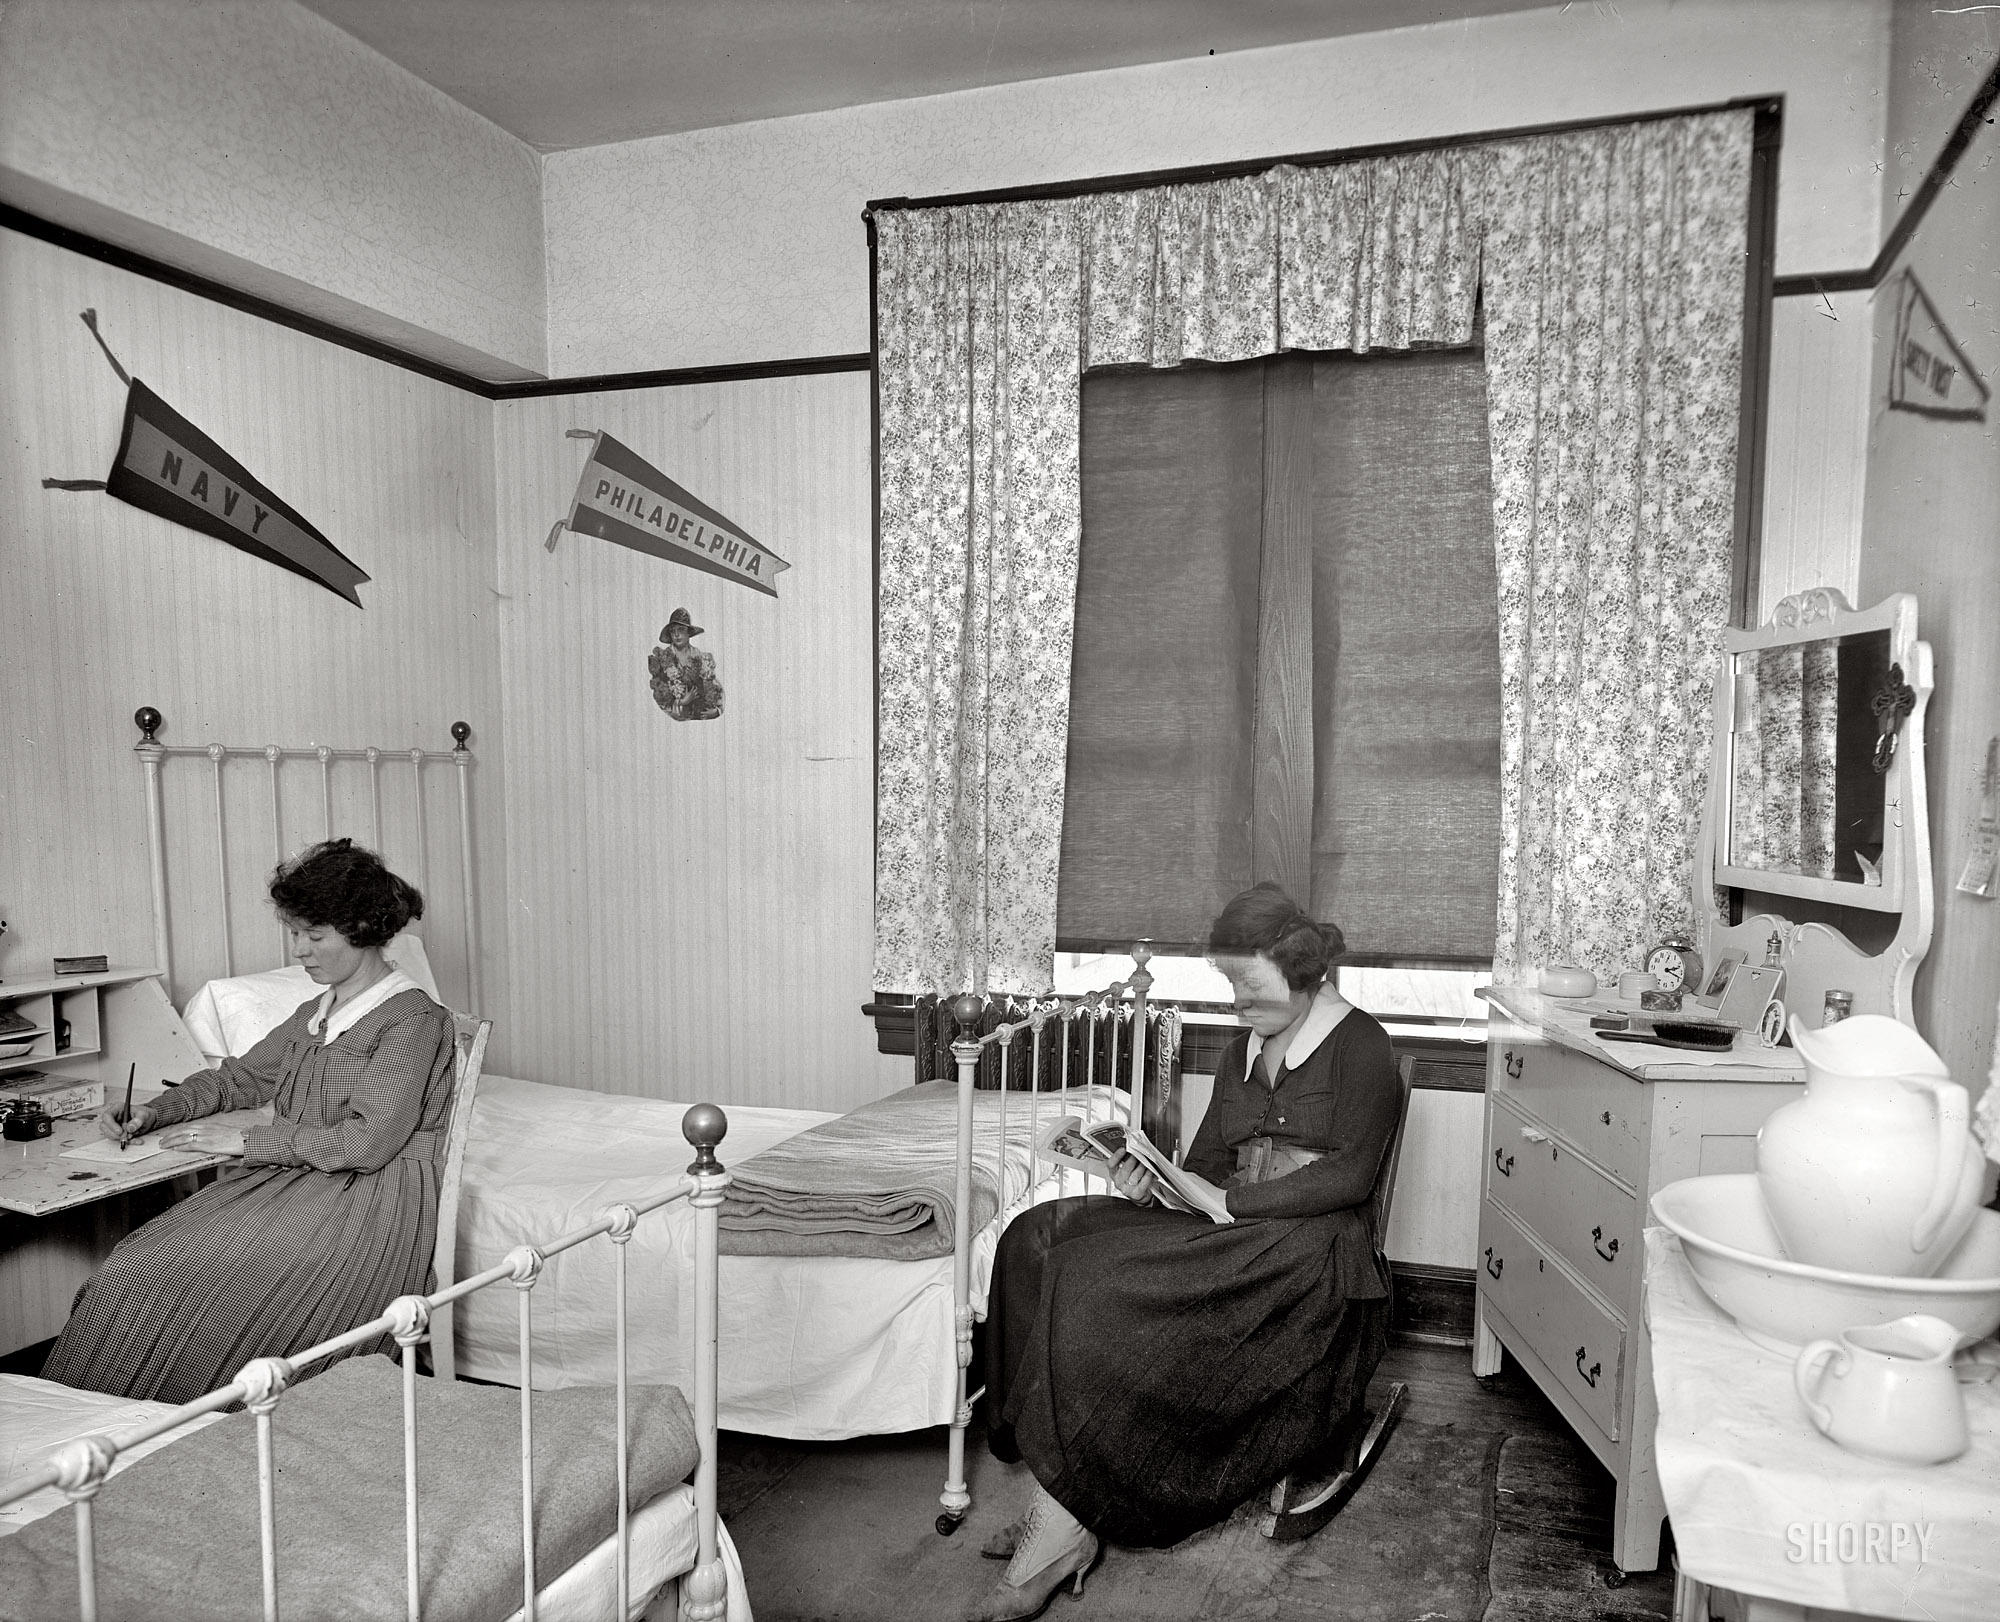 Washington, D.C., circa 1918. "Chesapeake & Potomac Telephone Co. dorm room." Being perused by Miss Double Exposure: the January 1918 issue of Red Cross magazine. Harris & Ewing Collection glass negative. View full size.